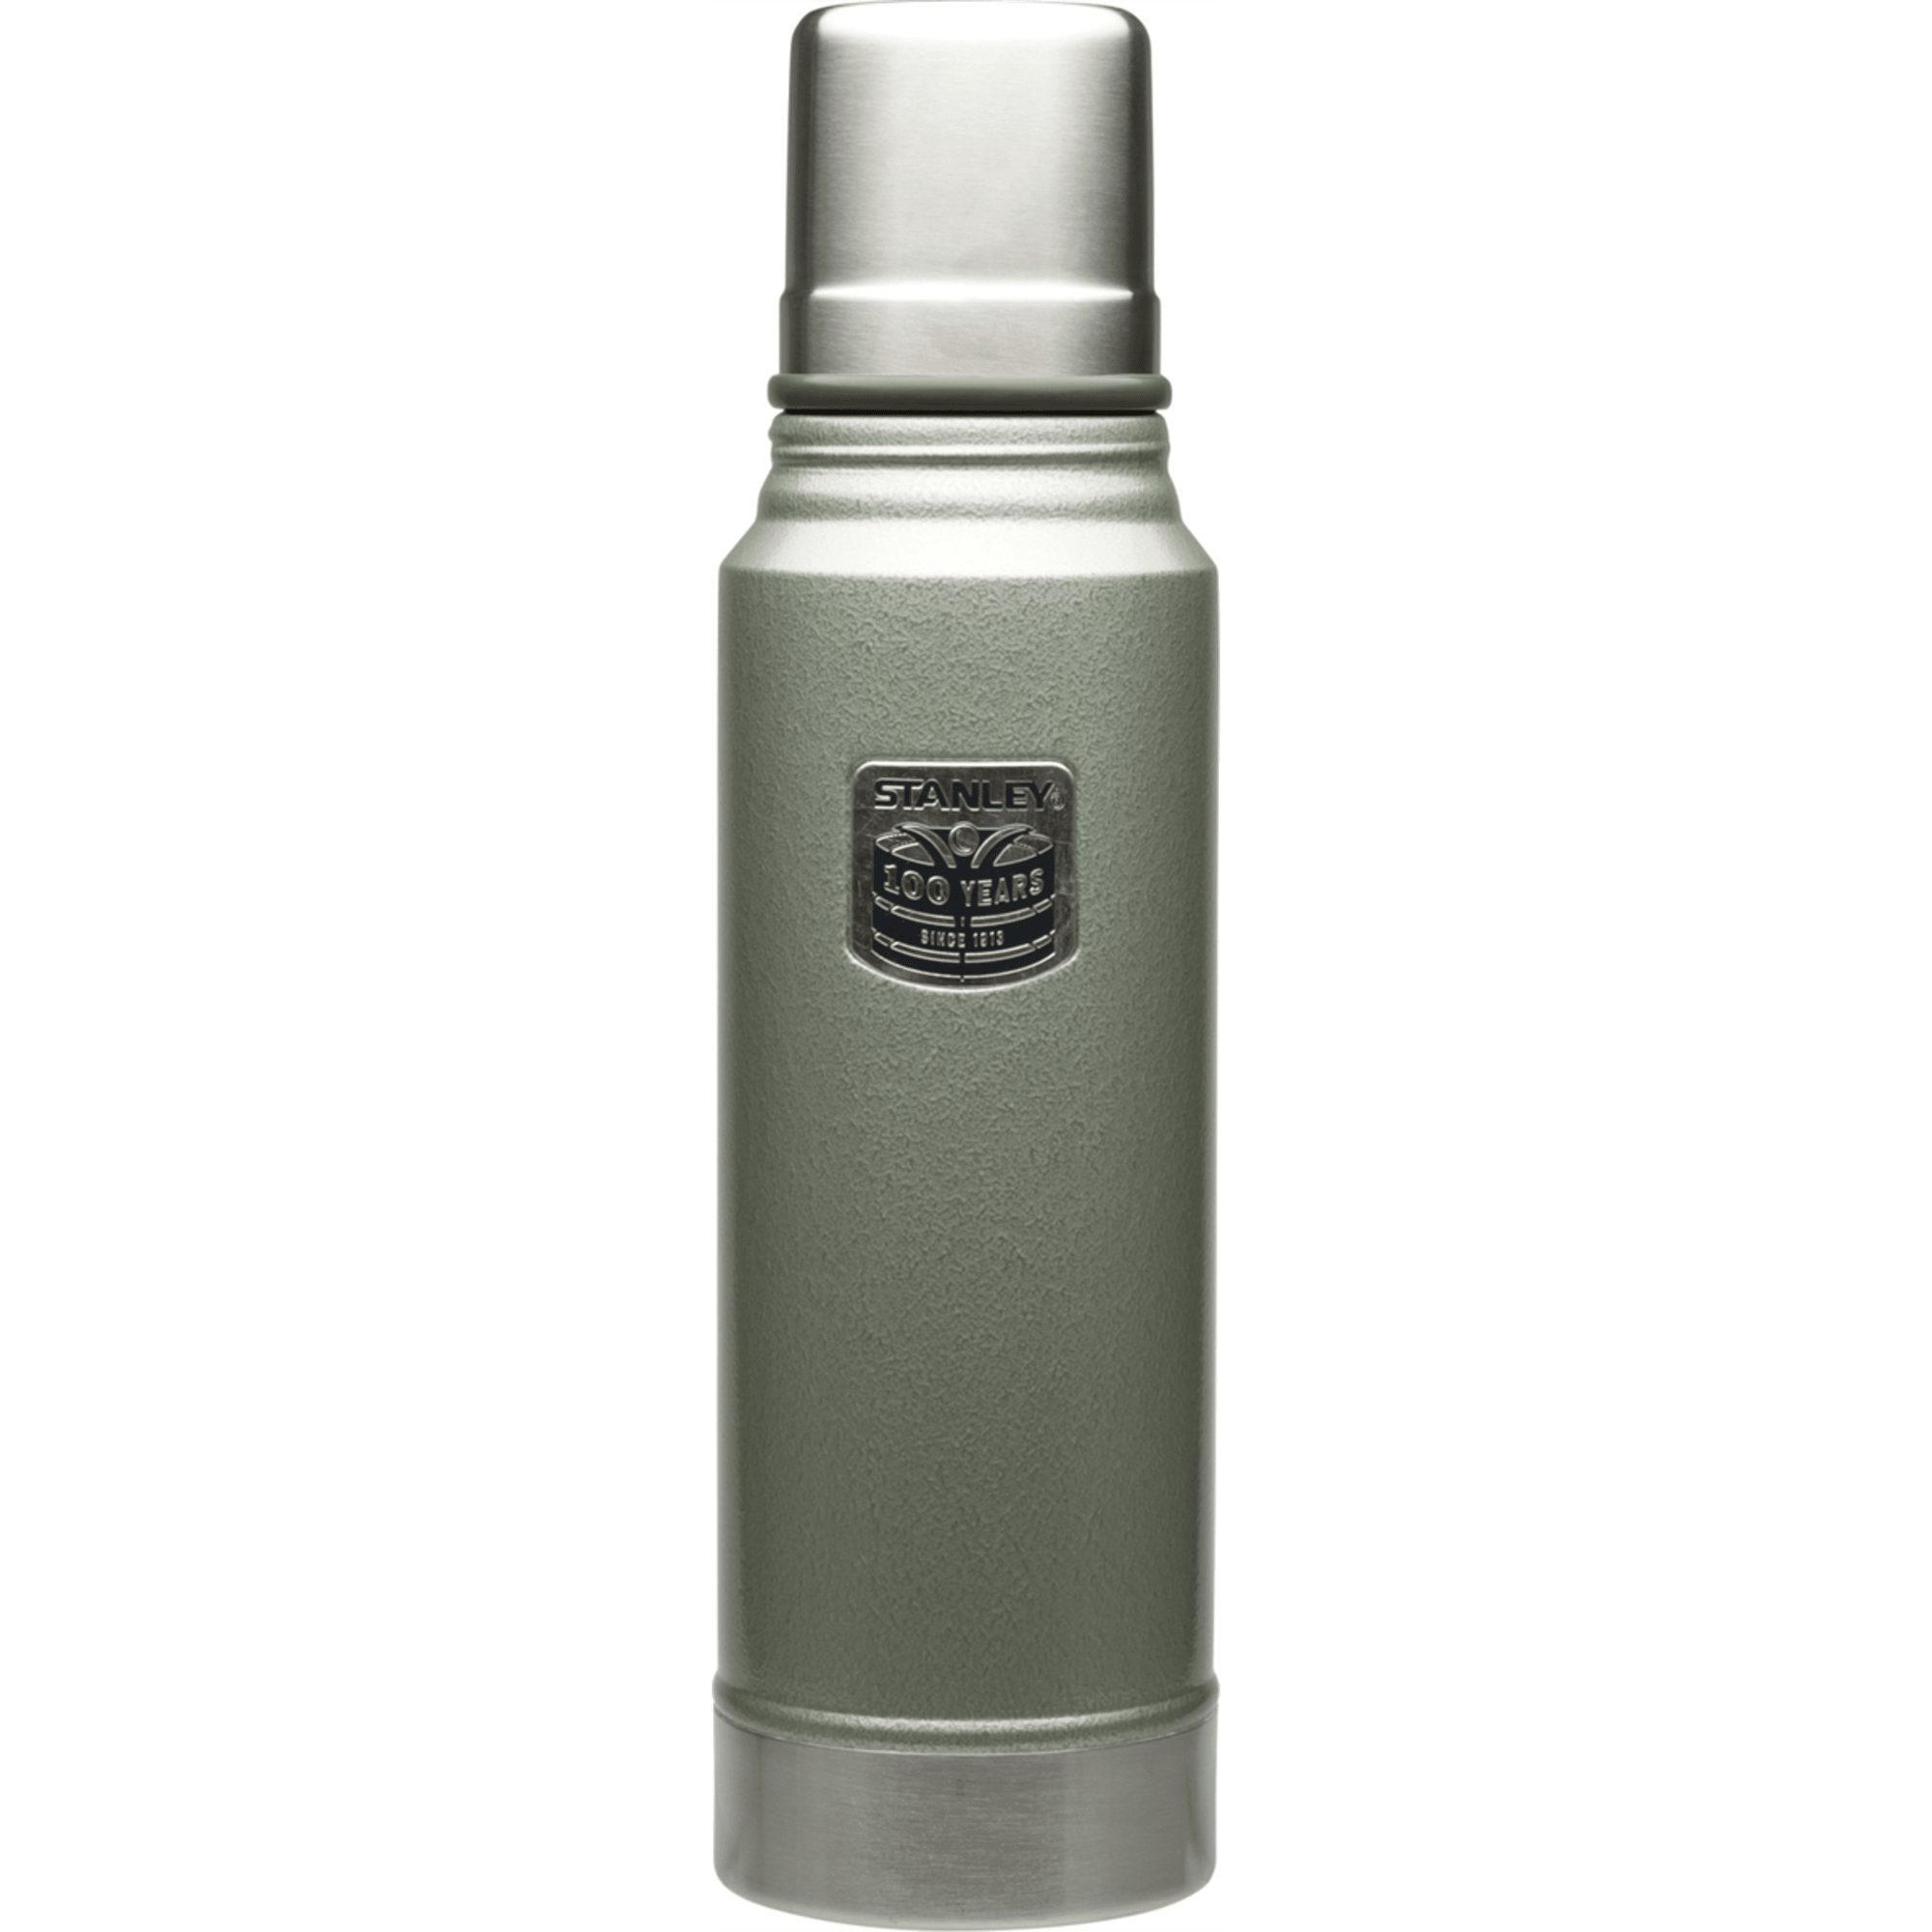 Stanley Thermos 100 Years Since 1913